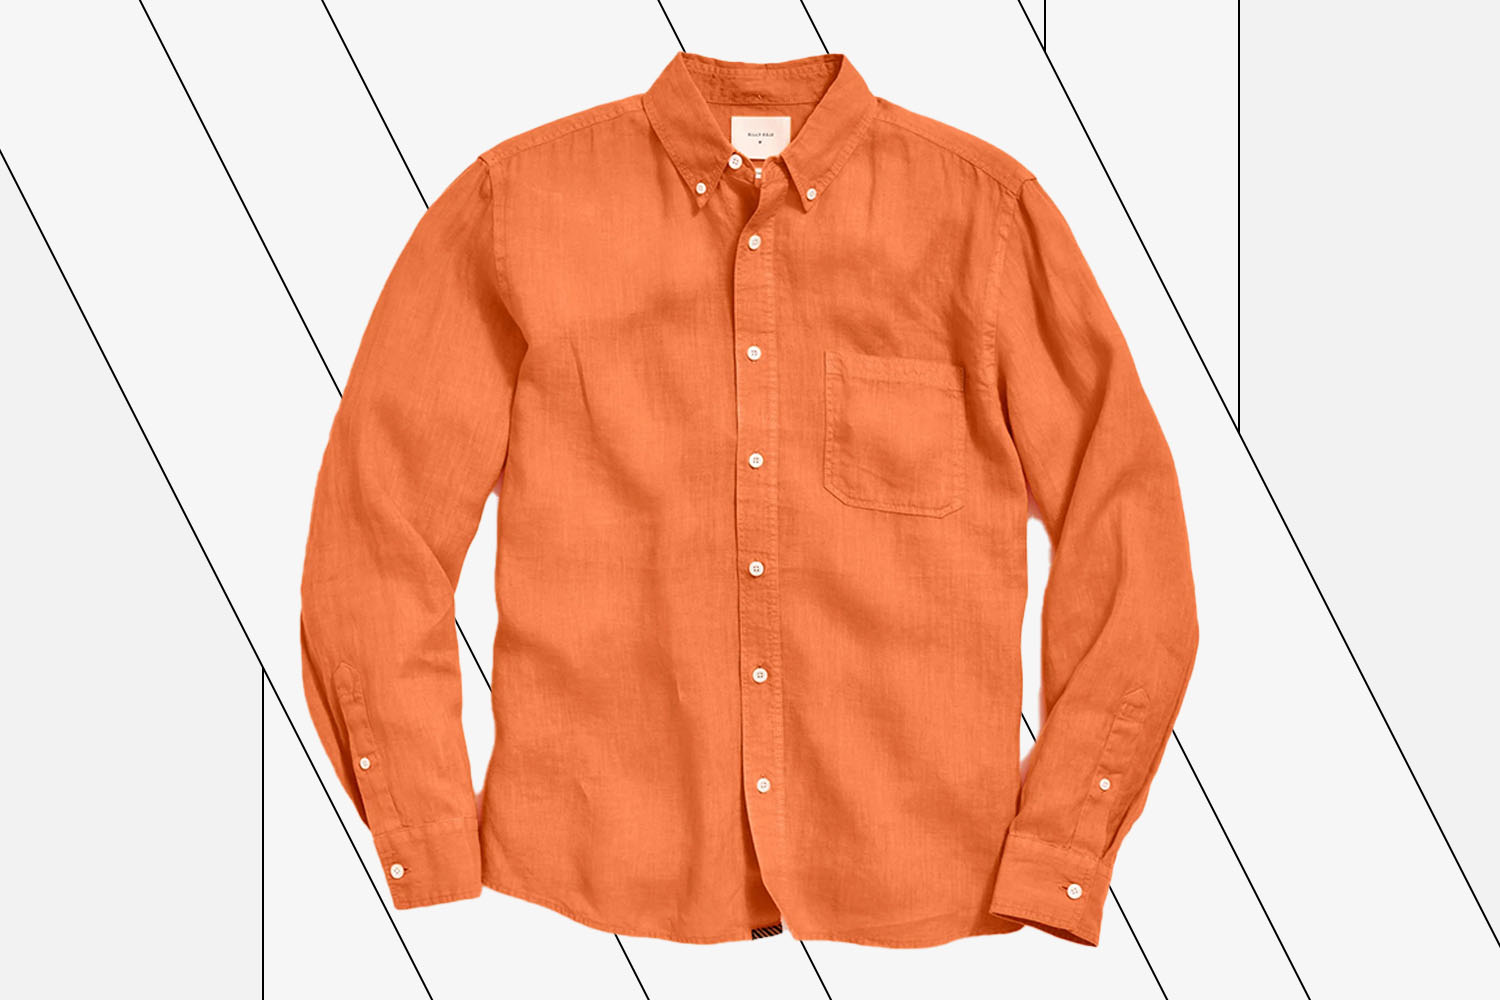 The Billy Reid Tuscumbia Linen Shirt Button Down, which is on sale during the brand's Linen Event